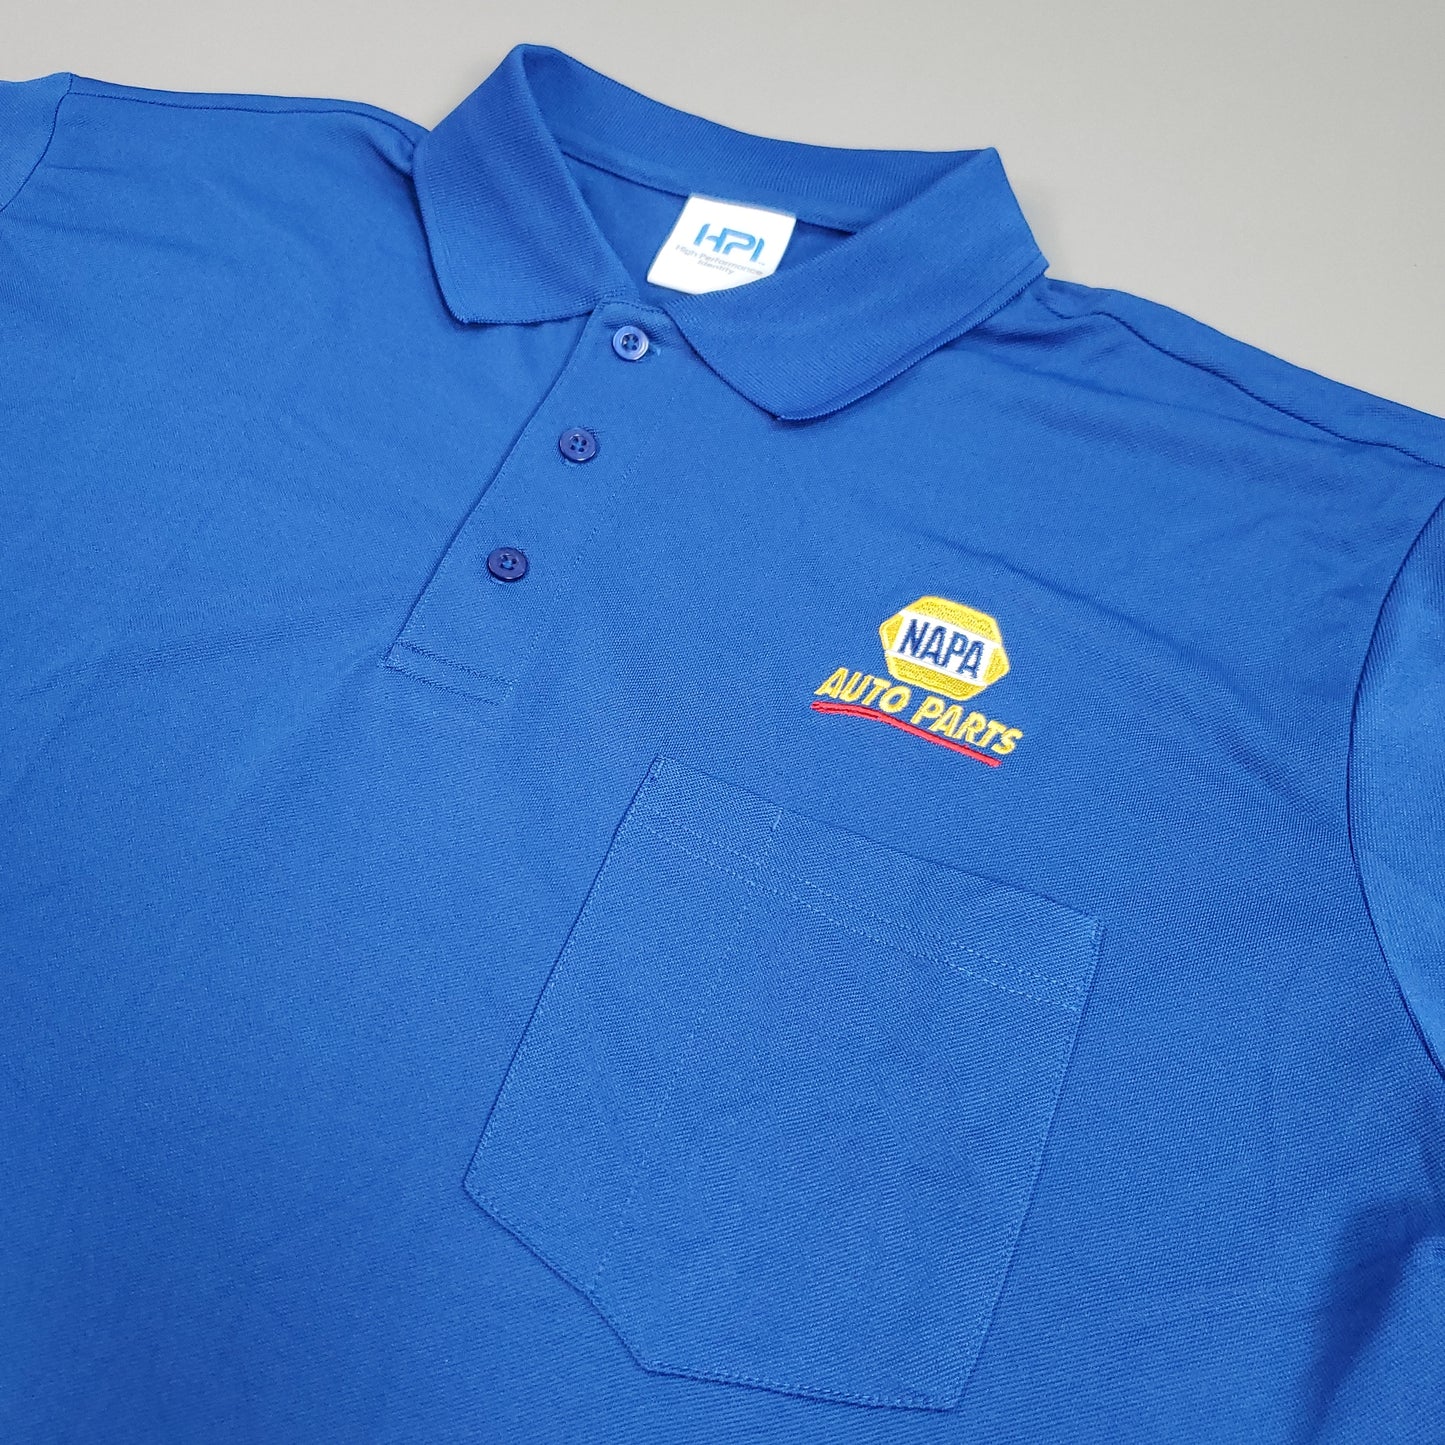 NAPA Auto Parts Employee Staff Uniform Polo SS Embroidered Shirt Unisex Sz L Blue (New Other)